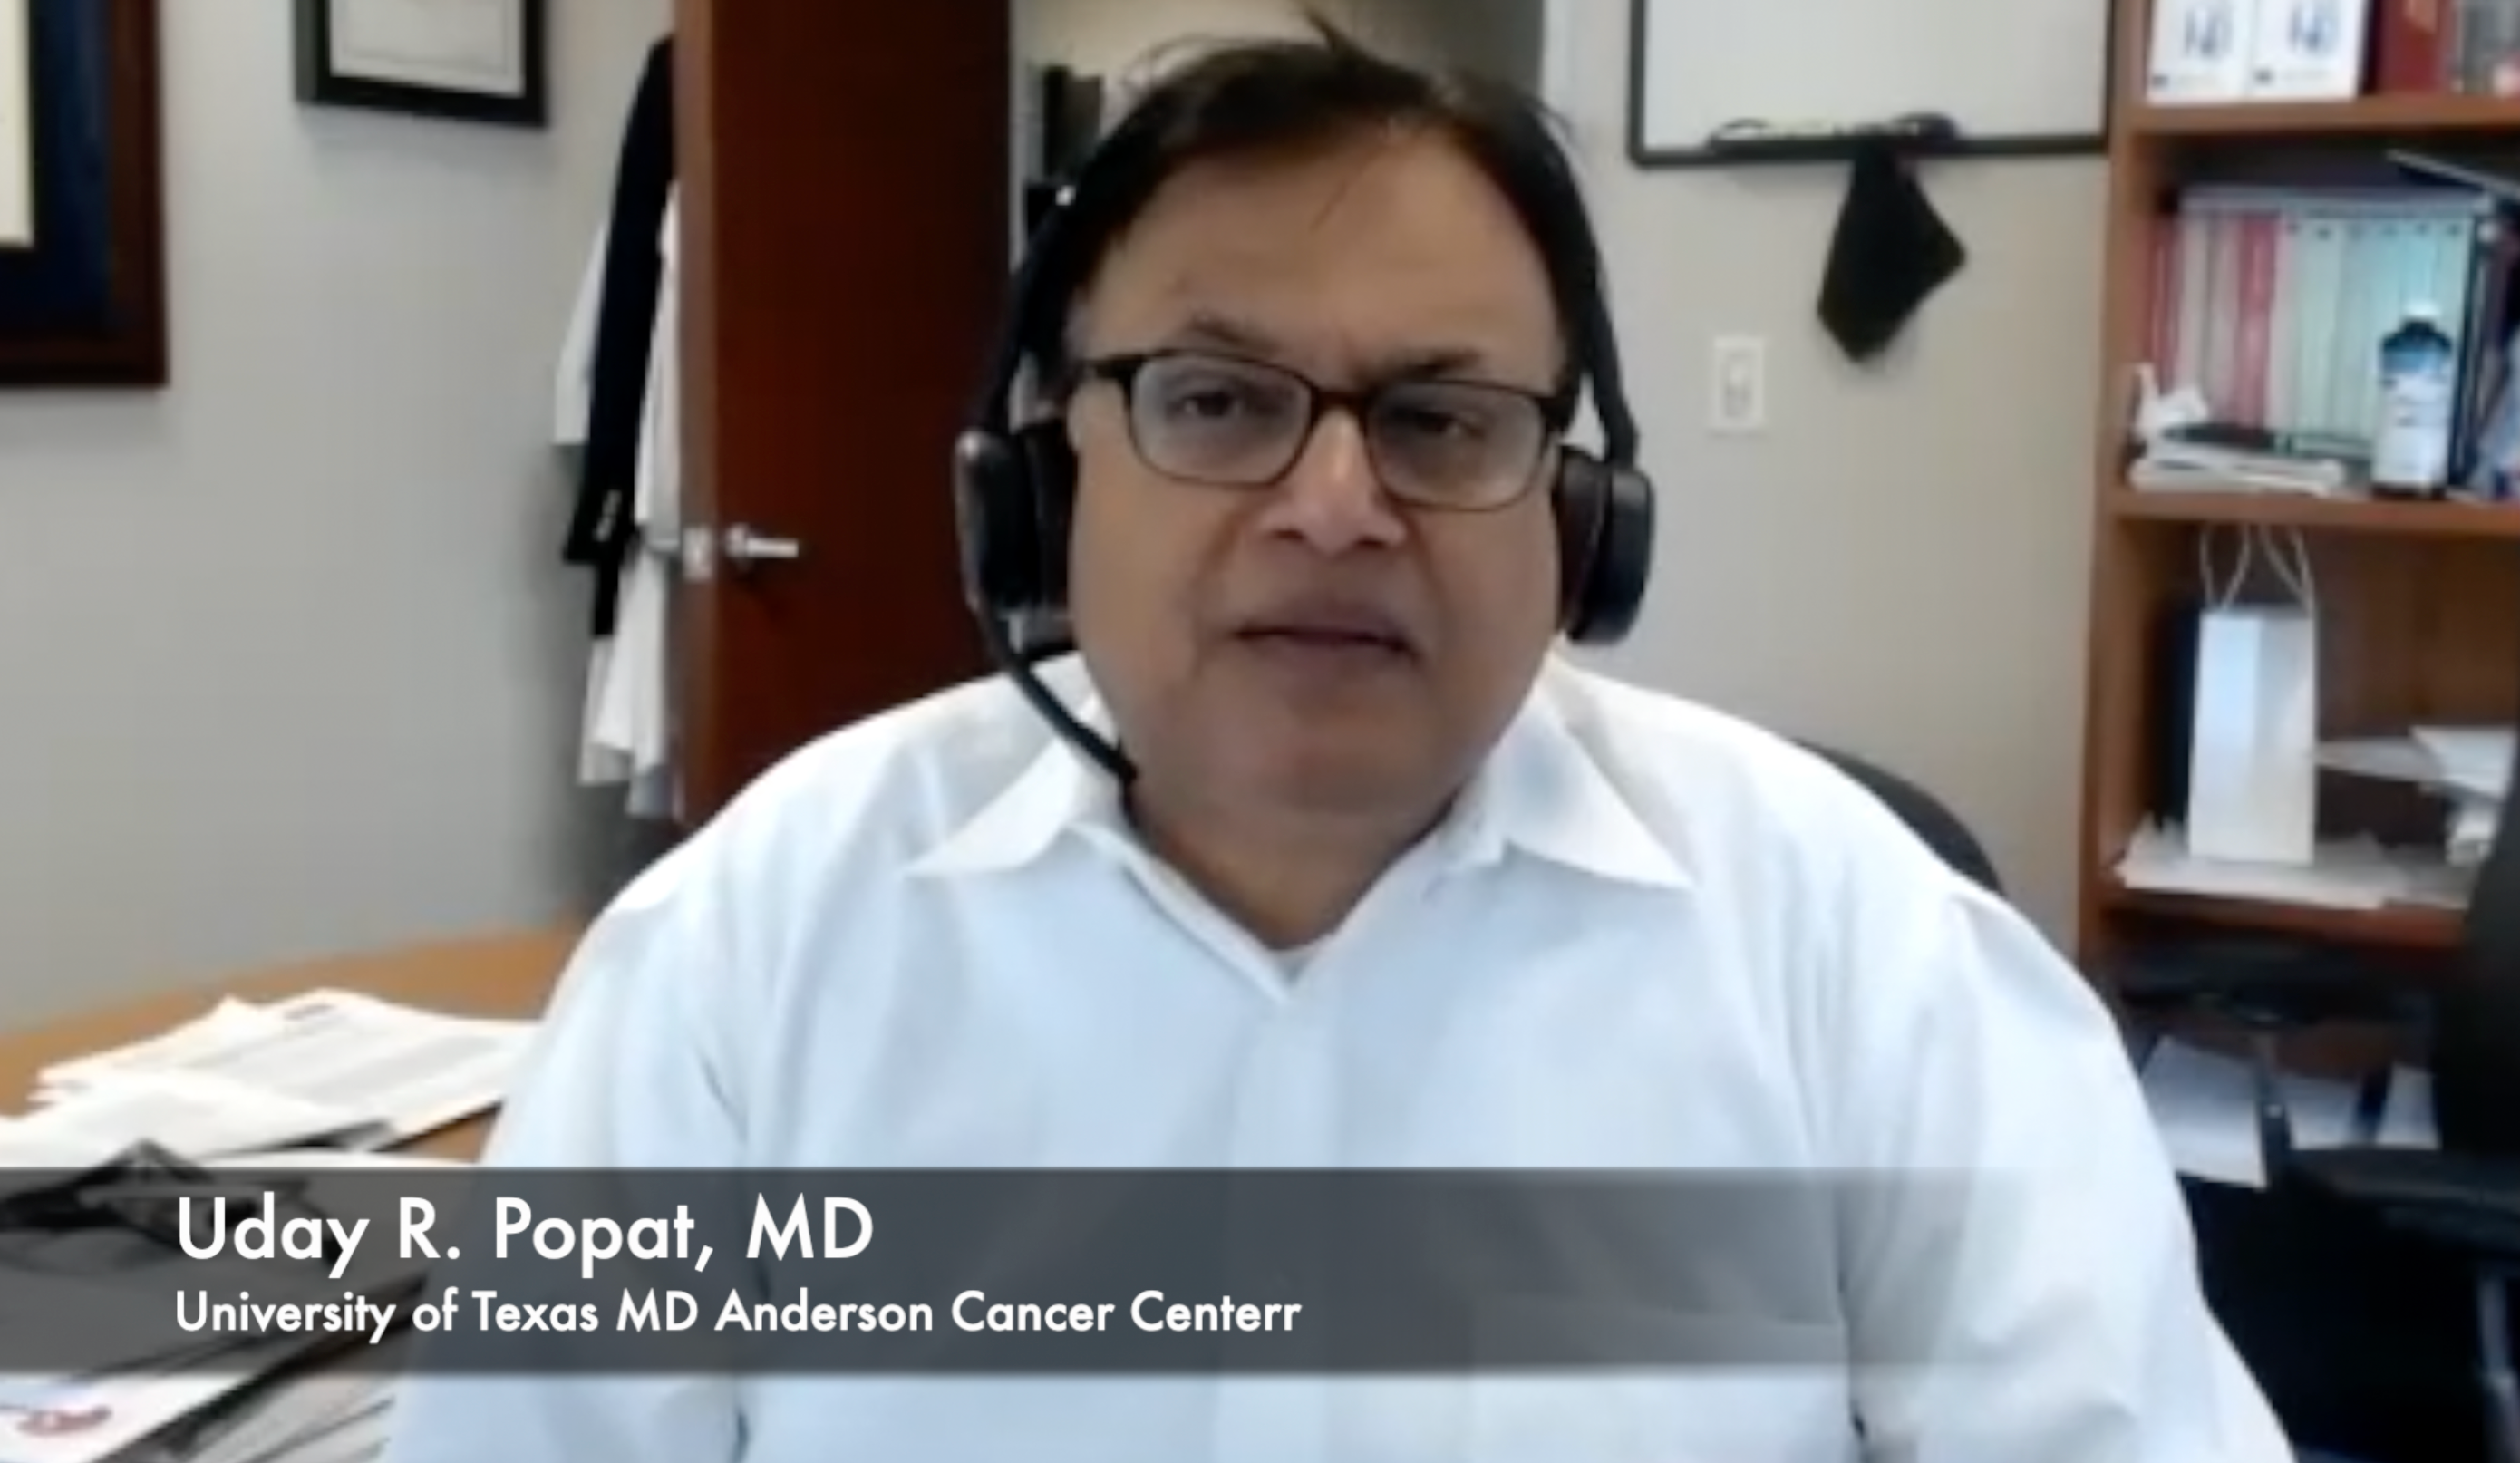 Uday R. Popat, MD, Discusses Rationale for Post-Transplant Cyclophosphamide as GVHD Prophylaxis in AML/MDS